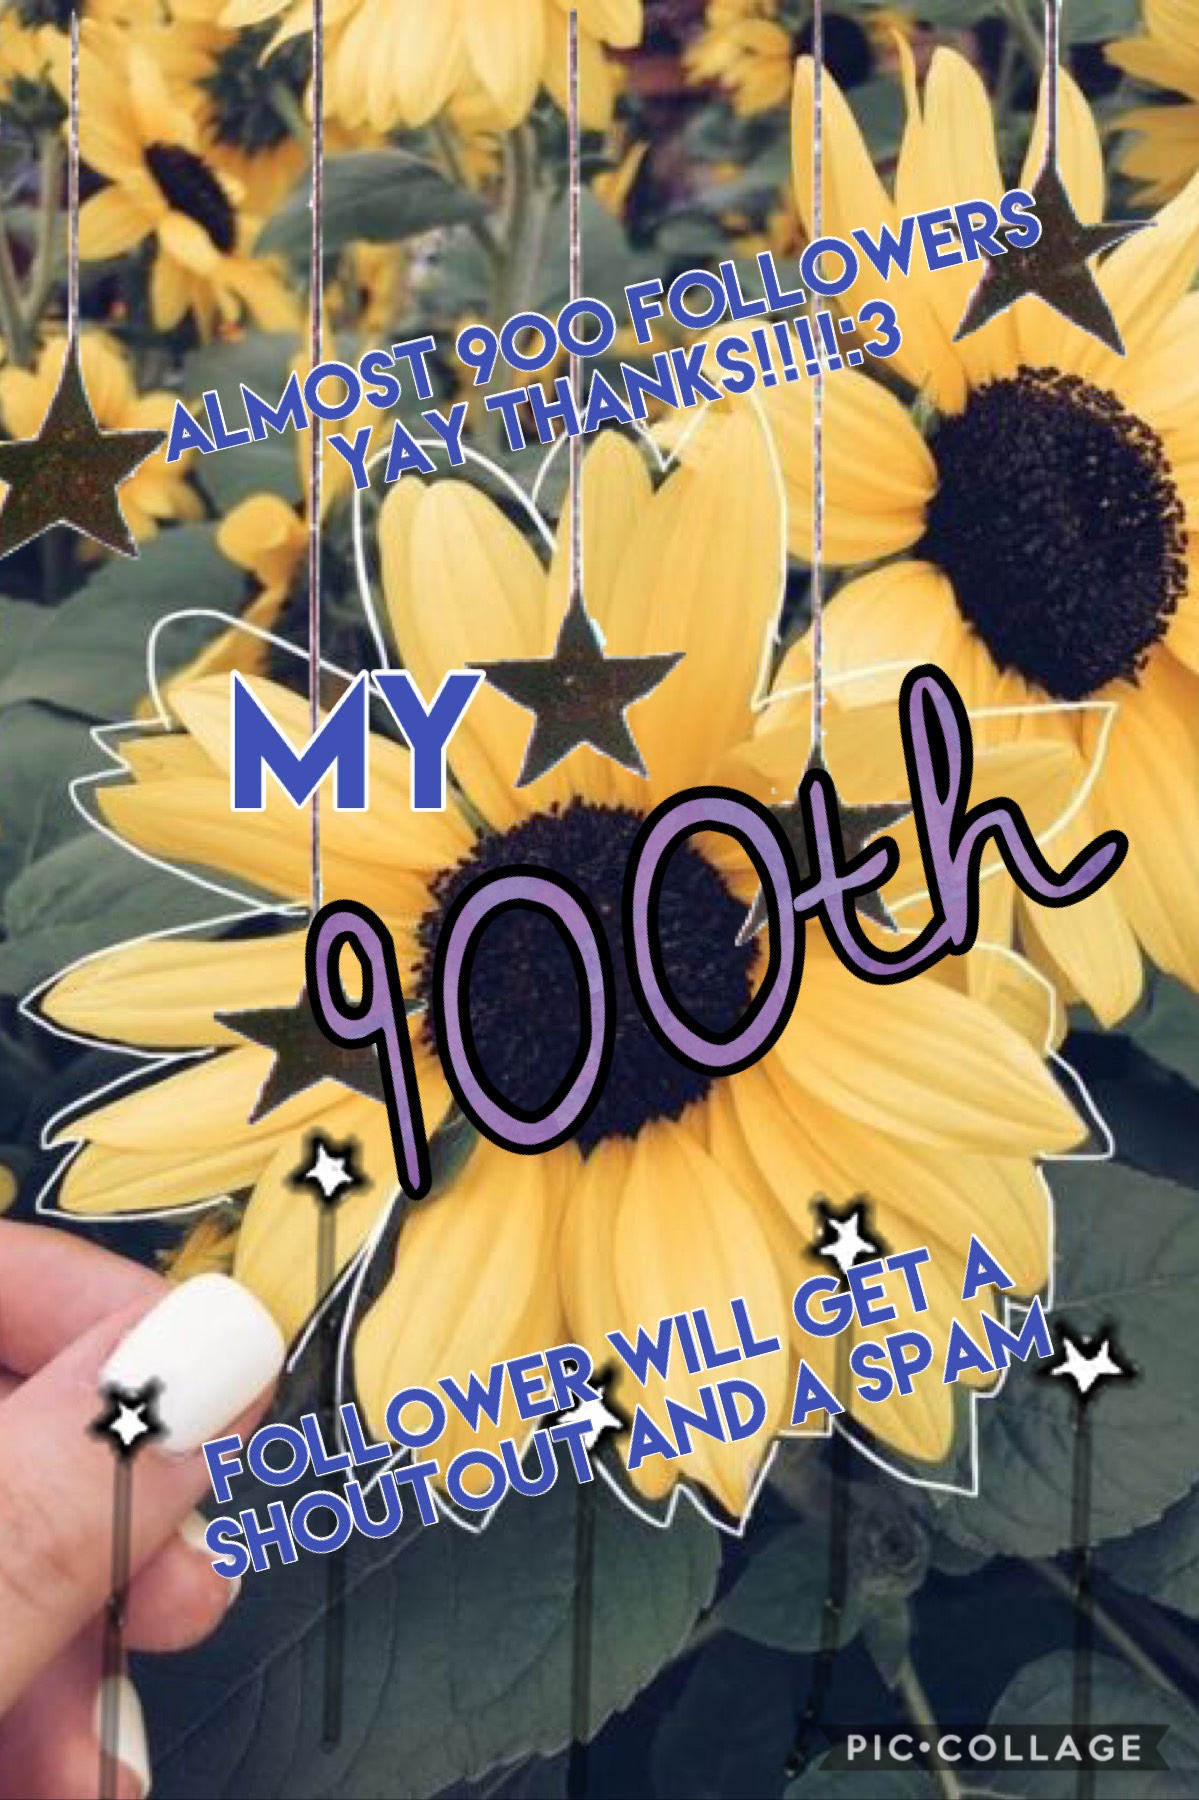 Just need 3 more followers to get 900 followers 🤭😘🥰😍😆😆😆😆